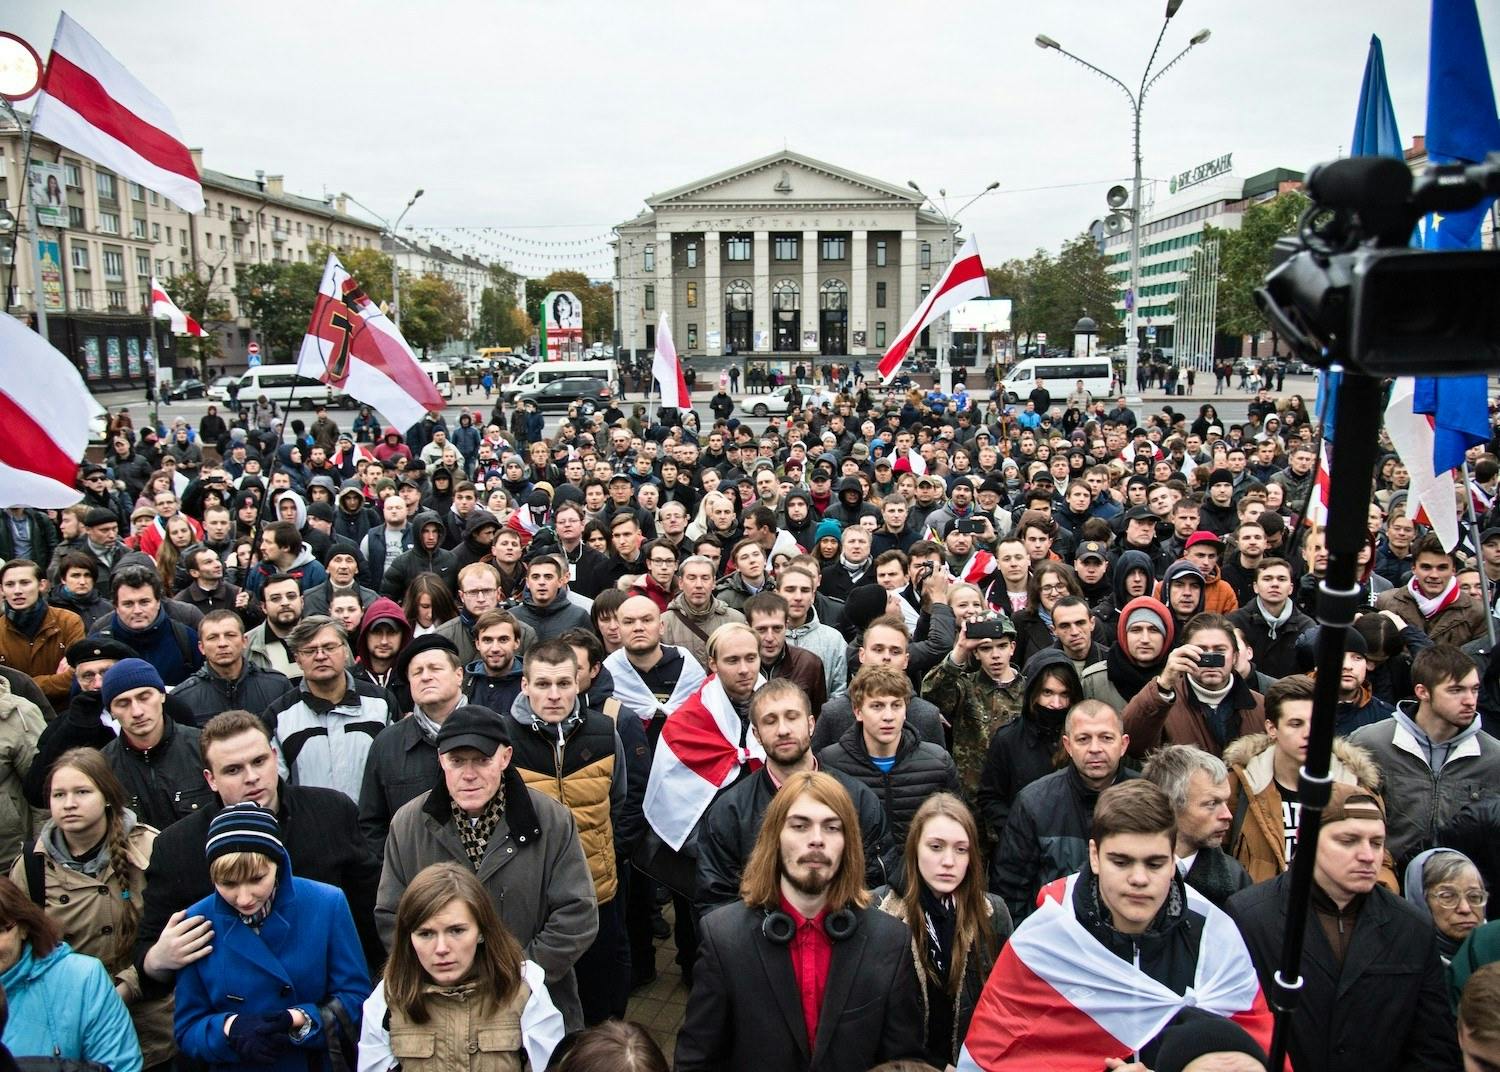 The people of Belarus took to the streets to oppose the Lukashenko regime.